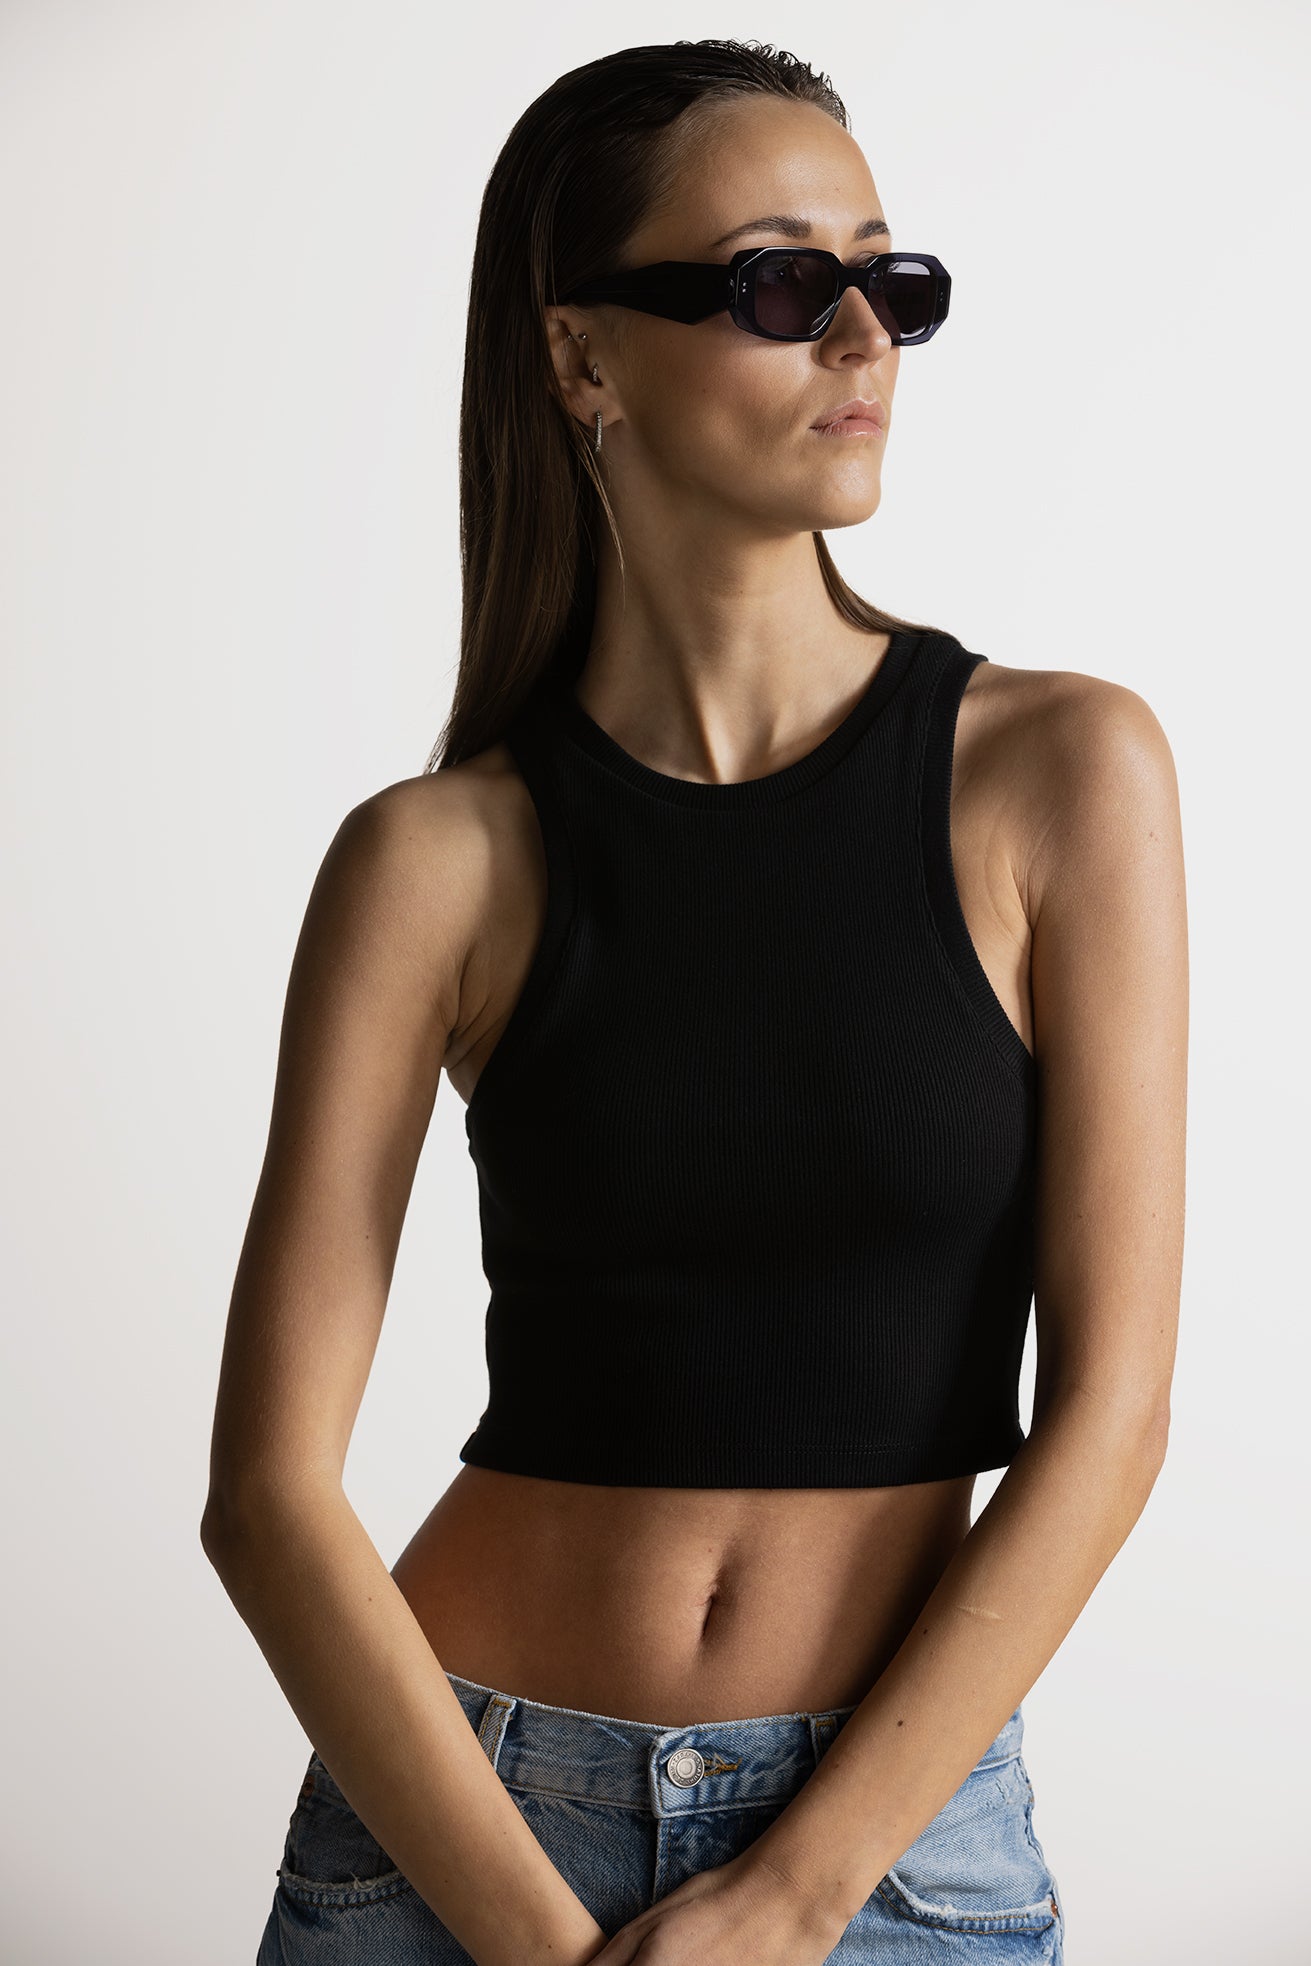 PIXIE WON'T PLAY CROFT CROP TOP RIBBED BLACK ORGANIC COTTON SUSTAINABLE FASHION WEAR WITHOUT BRA LUXURY SLEEVELESS STYLISH COMFORTABLE BREATHABLE FABRIC VERSATILE RELAXED FIT SOFT TRENDY SUMMER AUTUMN WINTER SPRING WEAR CASUAL OUTFIT WORKOUT LAYERING VARIOUS COLORS FASHIONABLE MUST-HAVE 